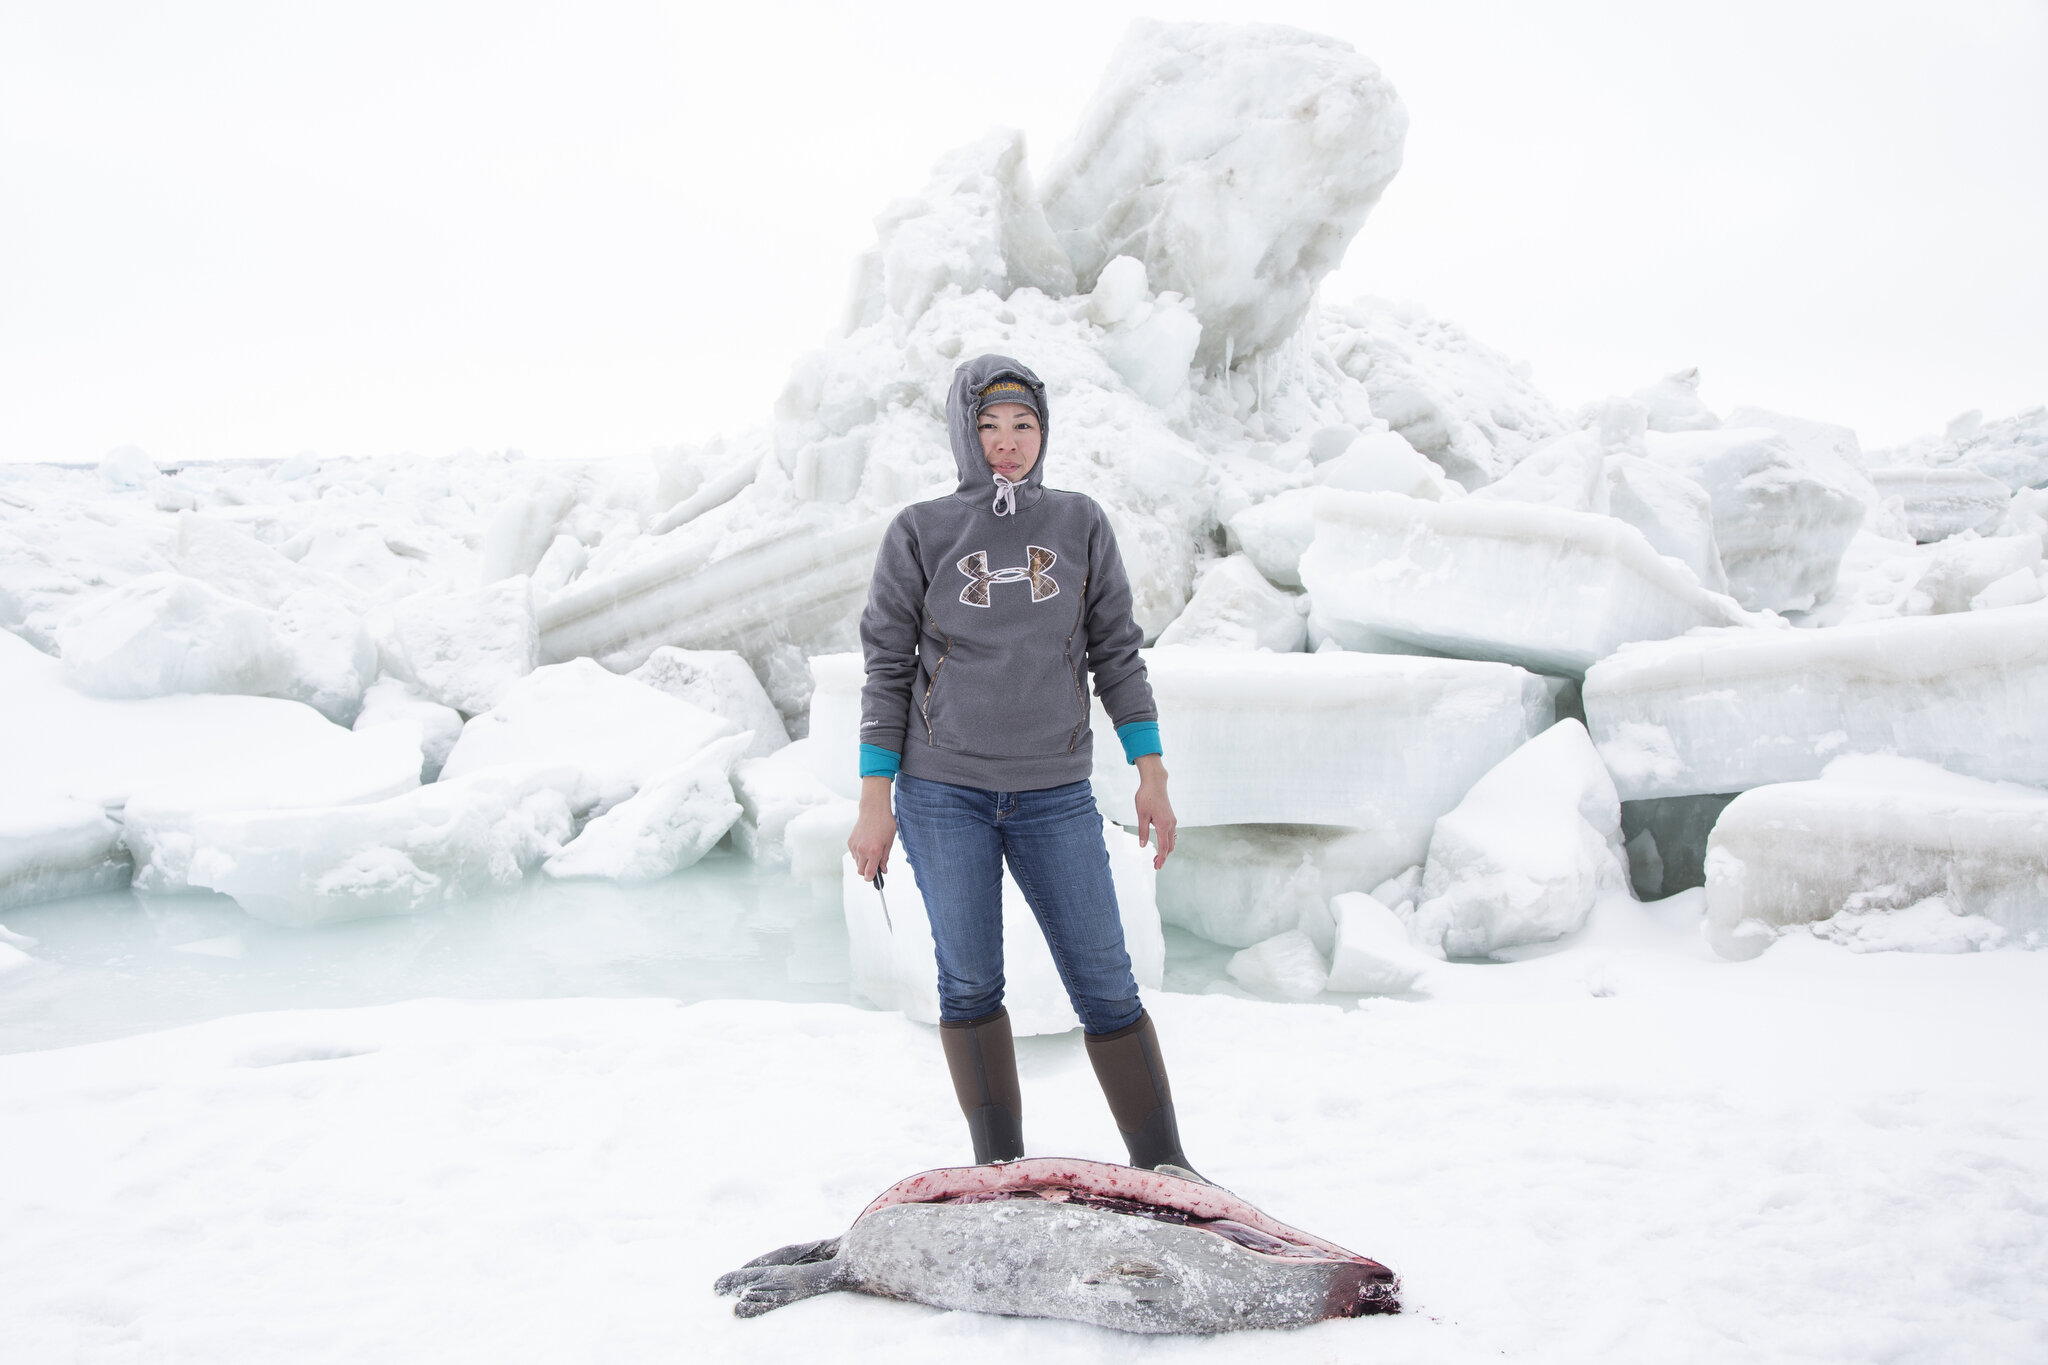  Flora Aiken processes a seal near Utqiaġvik (formerly known as Barrow), Alaska. April 27th, 2016. Hunting is an important rite of passage for the Inupiat families of the Alaskan Arctic, especially as these traditions are at an even greater risk of d